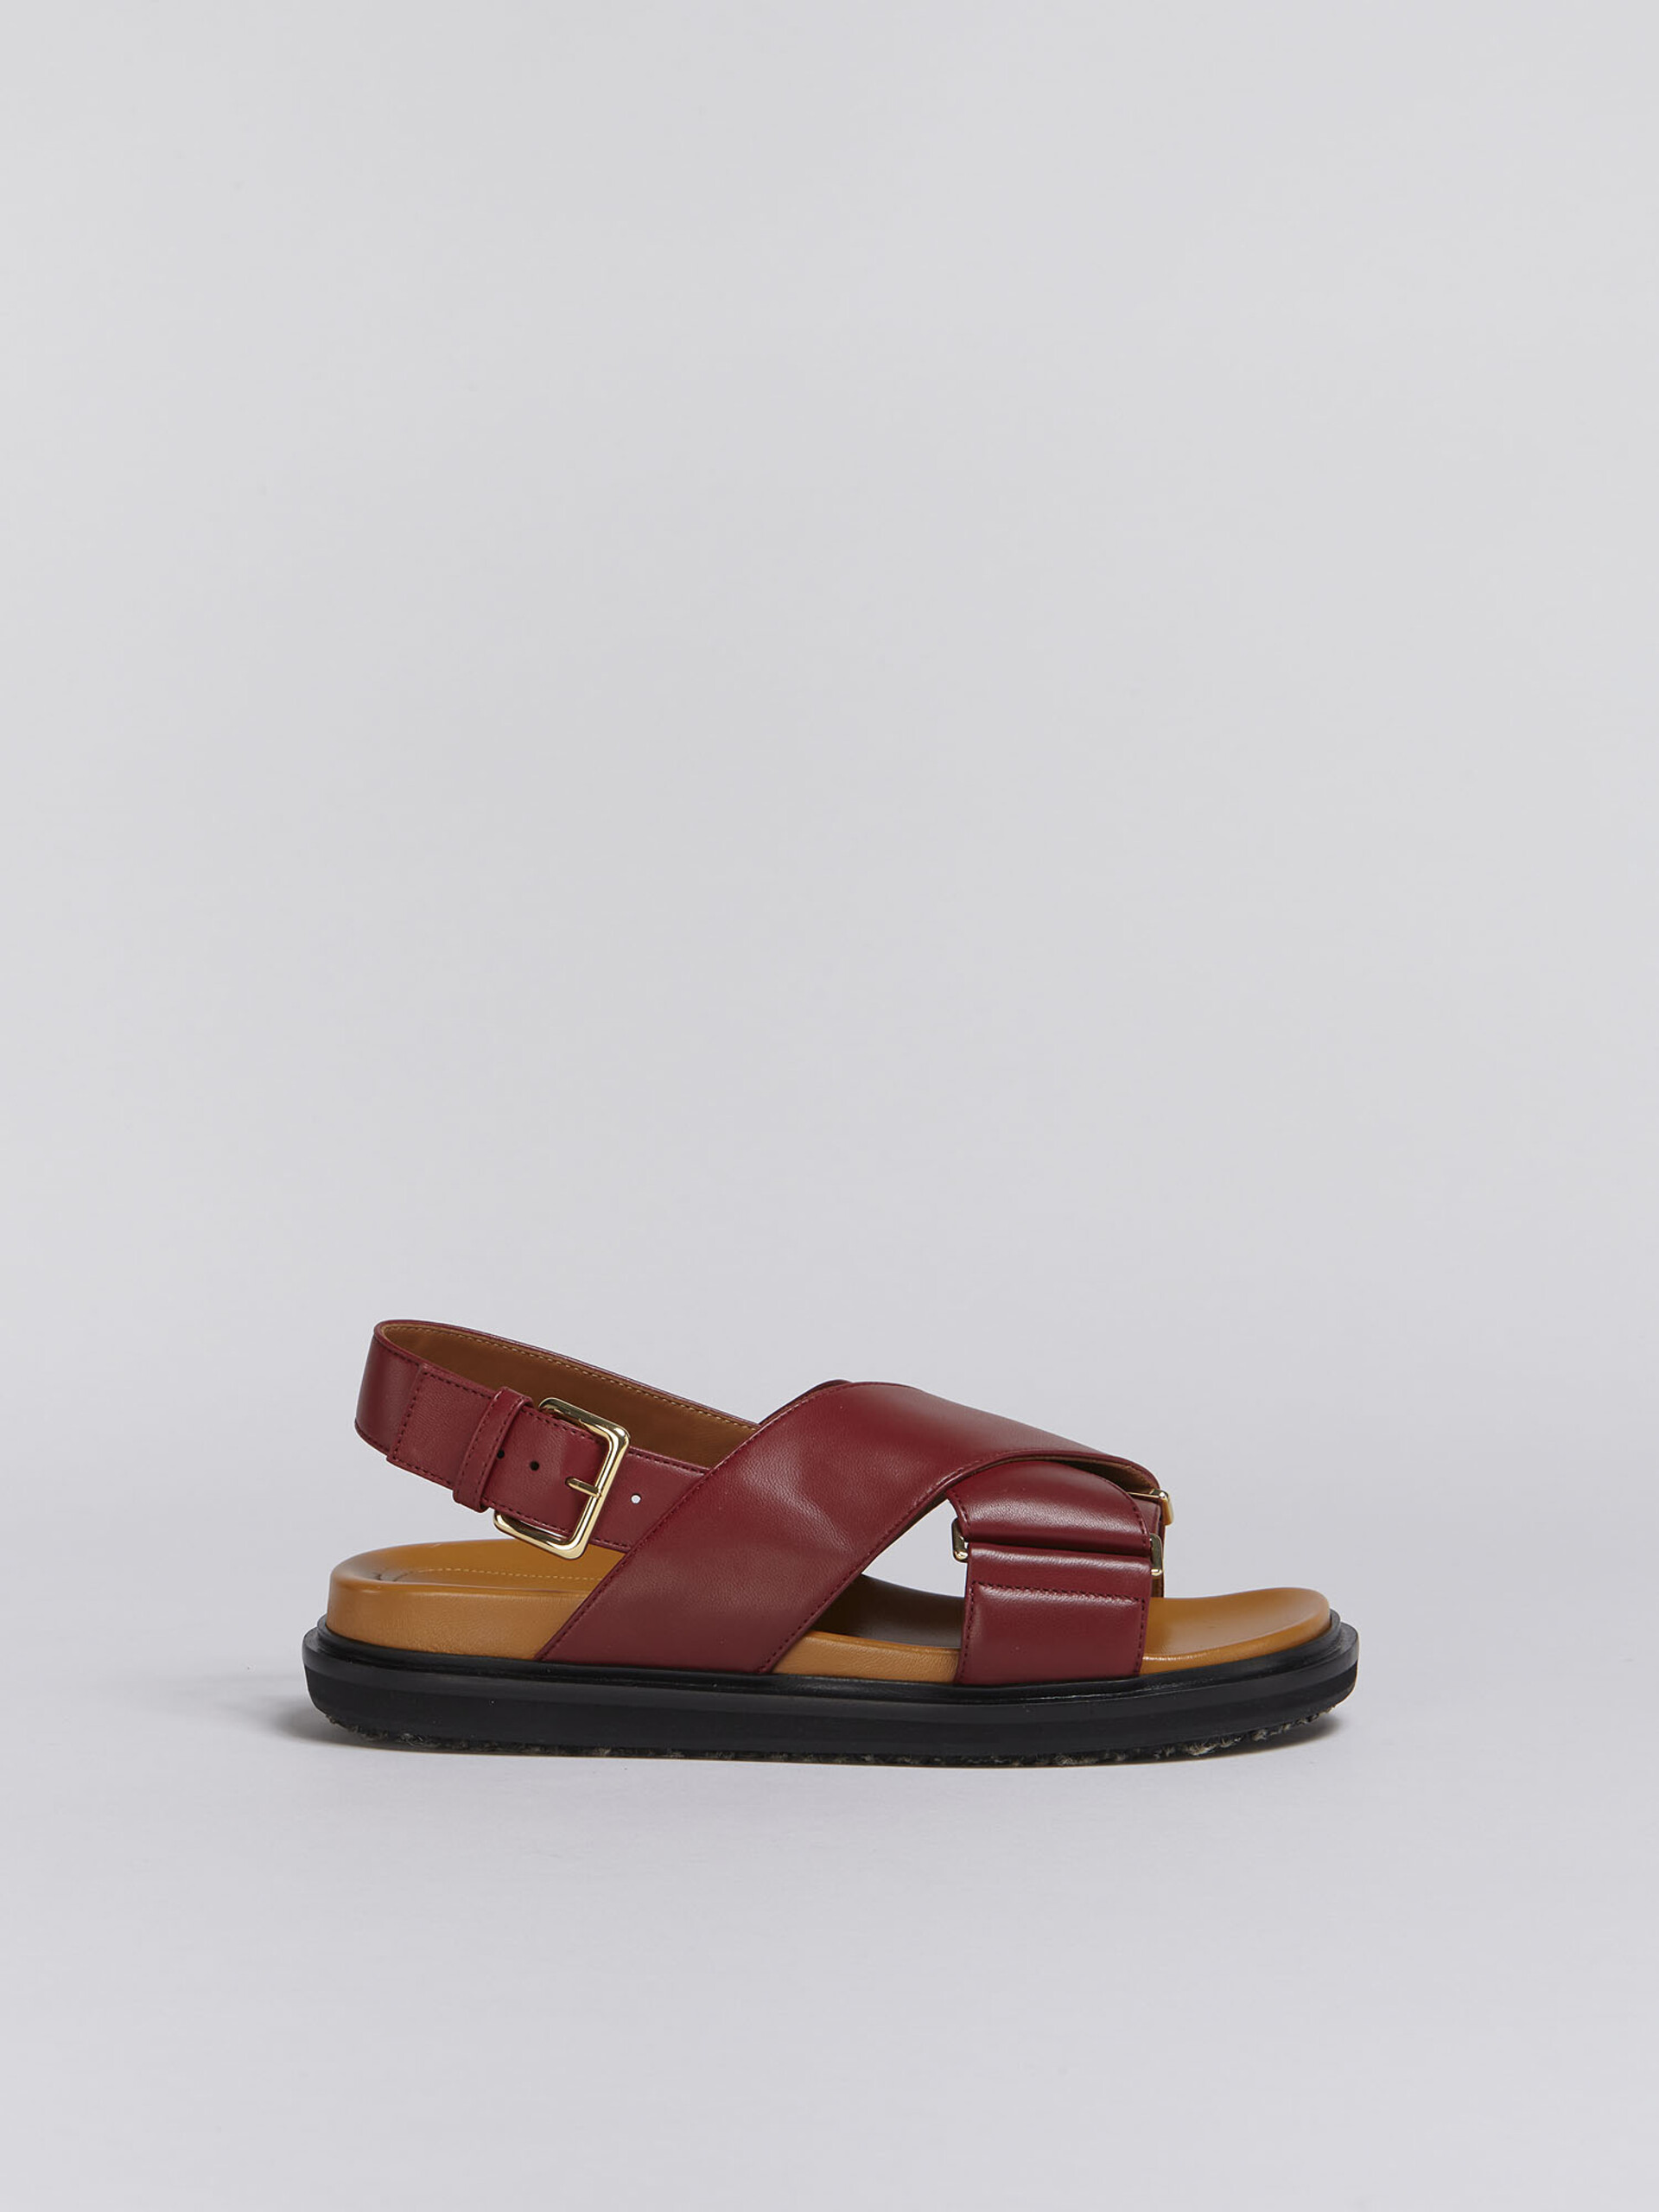 Red leather fussbett - Sandals - Image 1